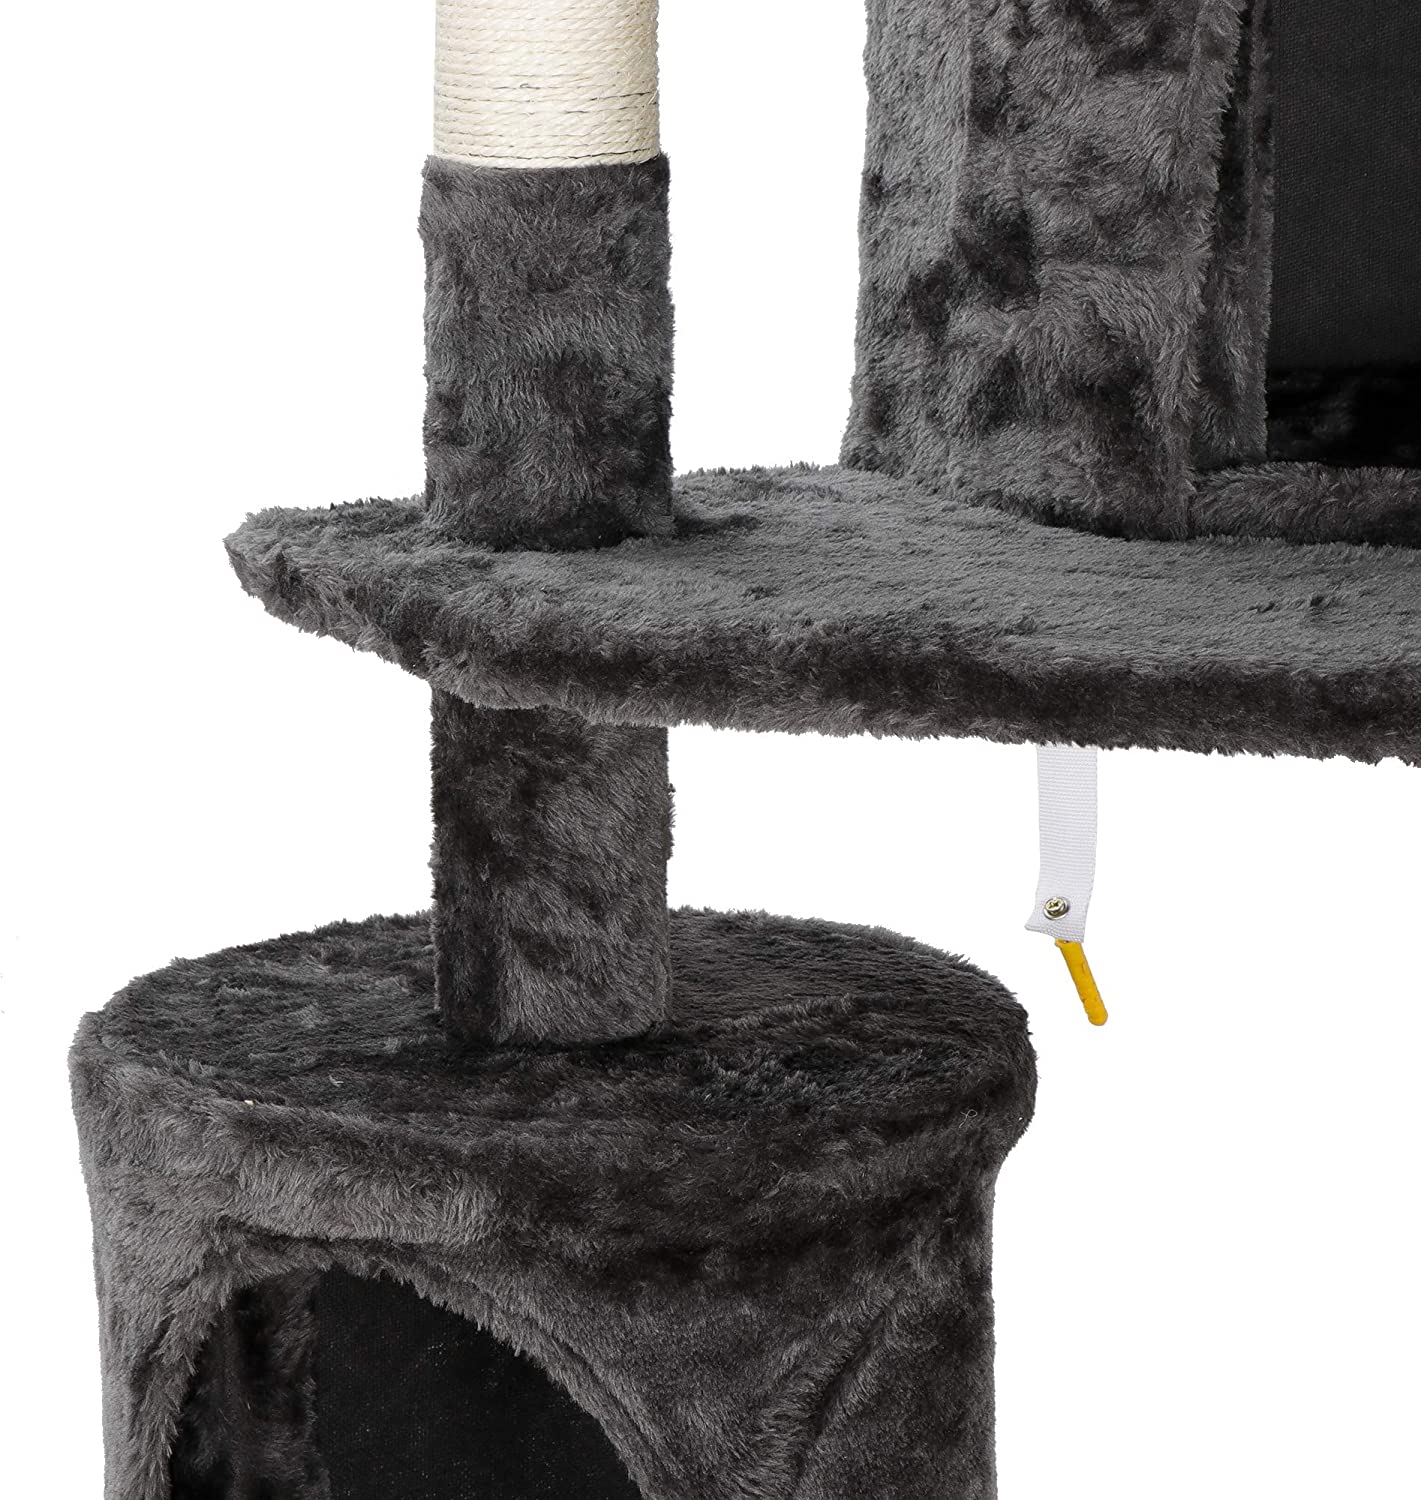 79 Inch Cat Tree, Multi-Level Cat Tower with Scratching Posts and Play House, Indoor Cat Furniture Condo Kitty Activity Center